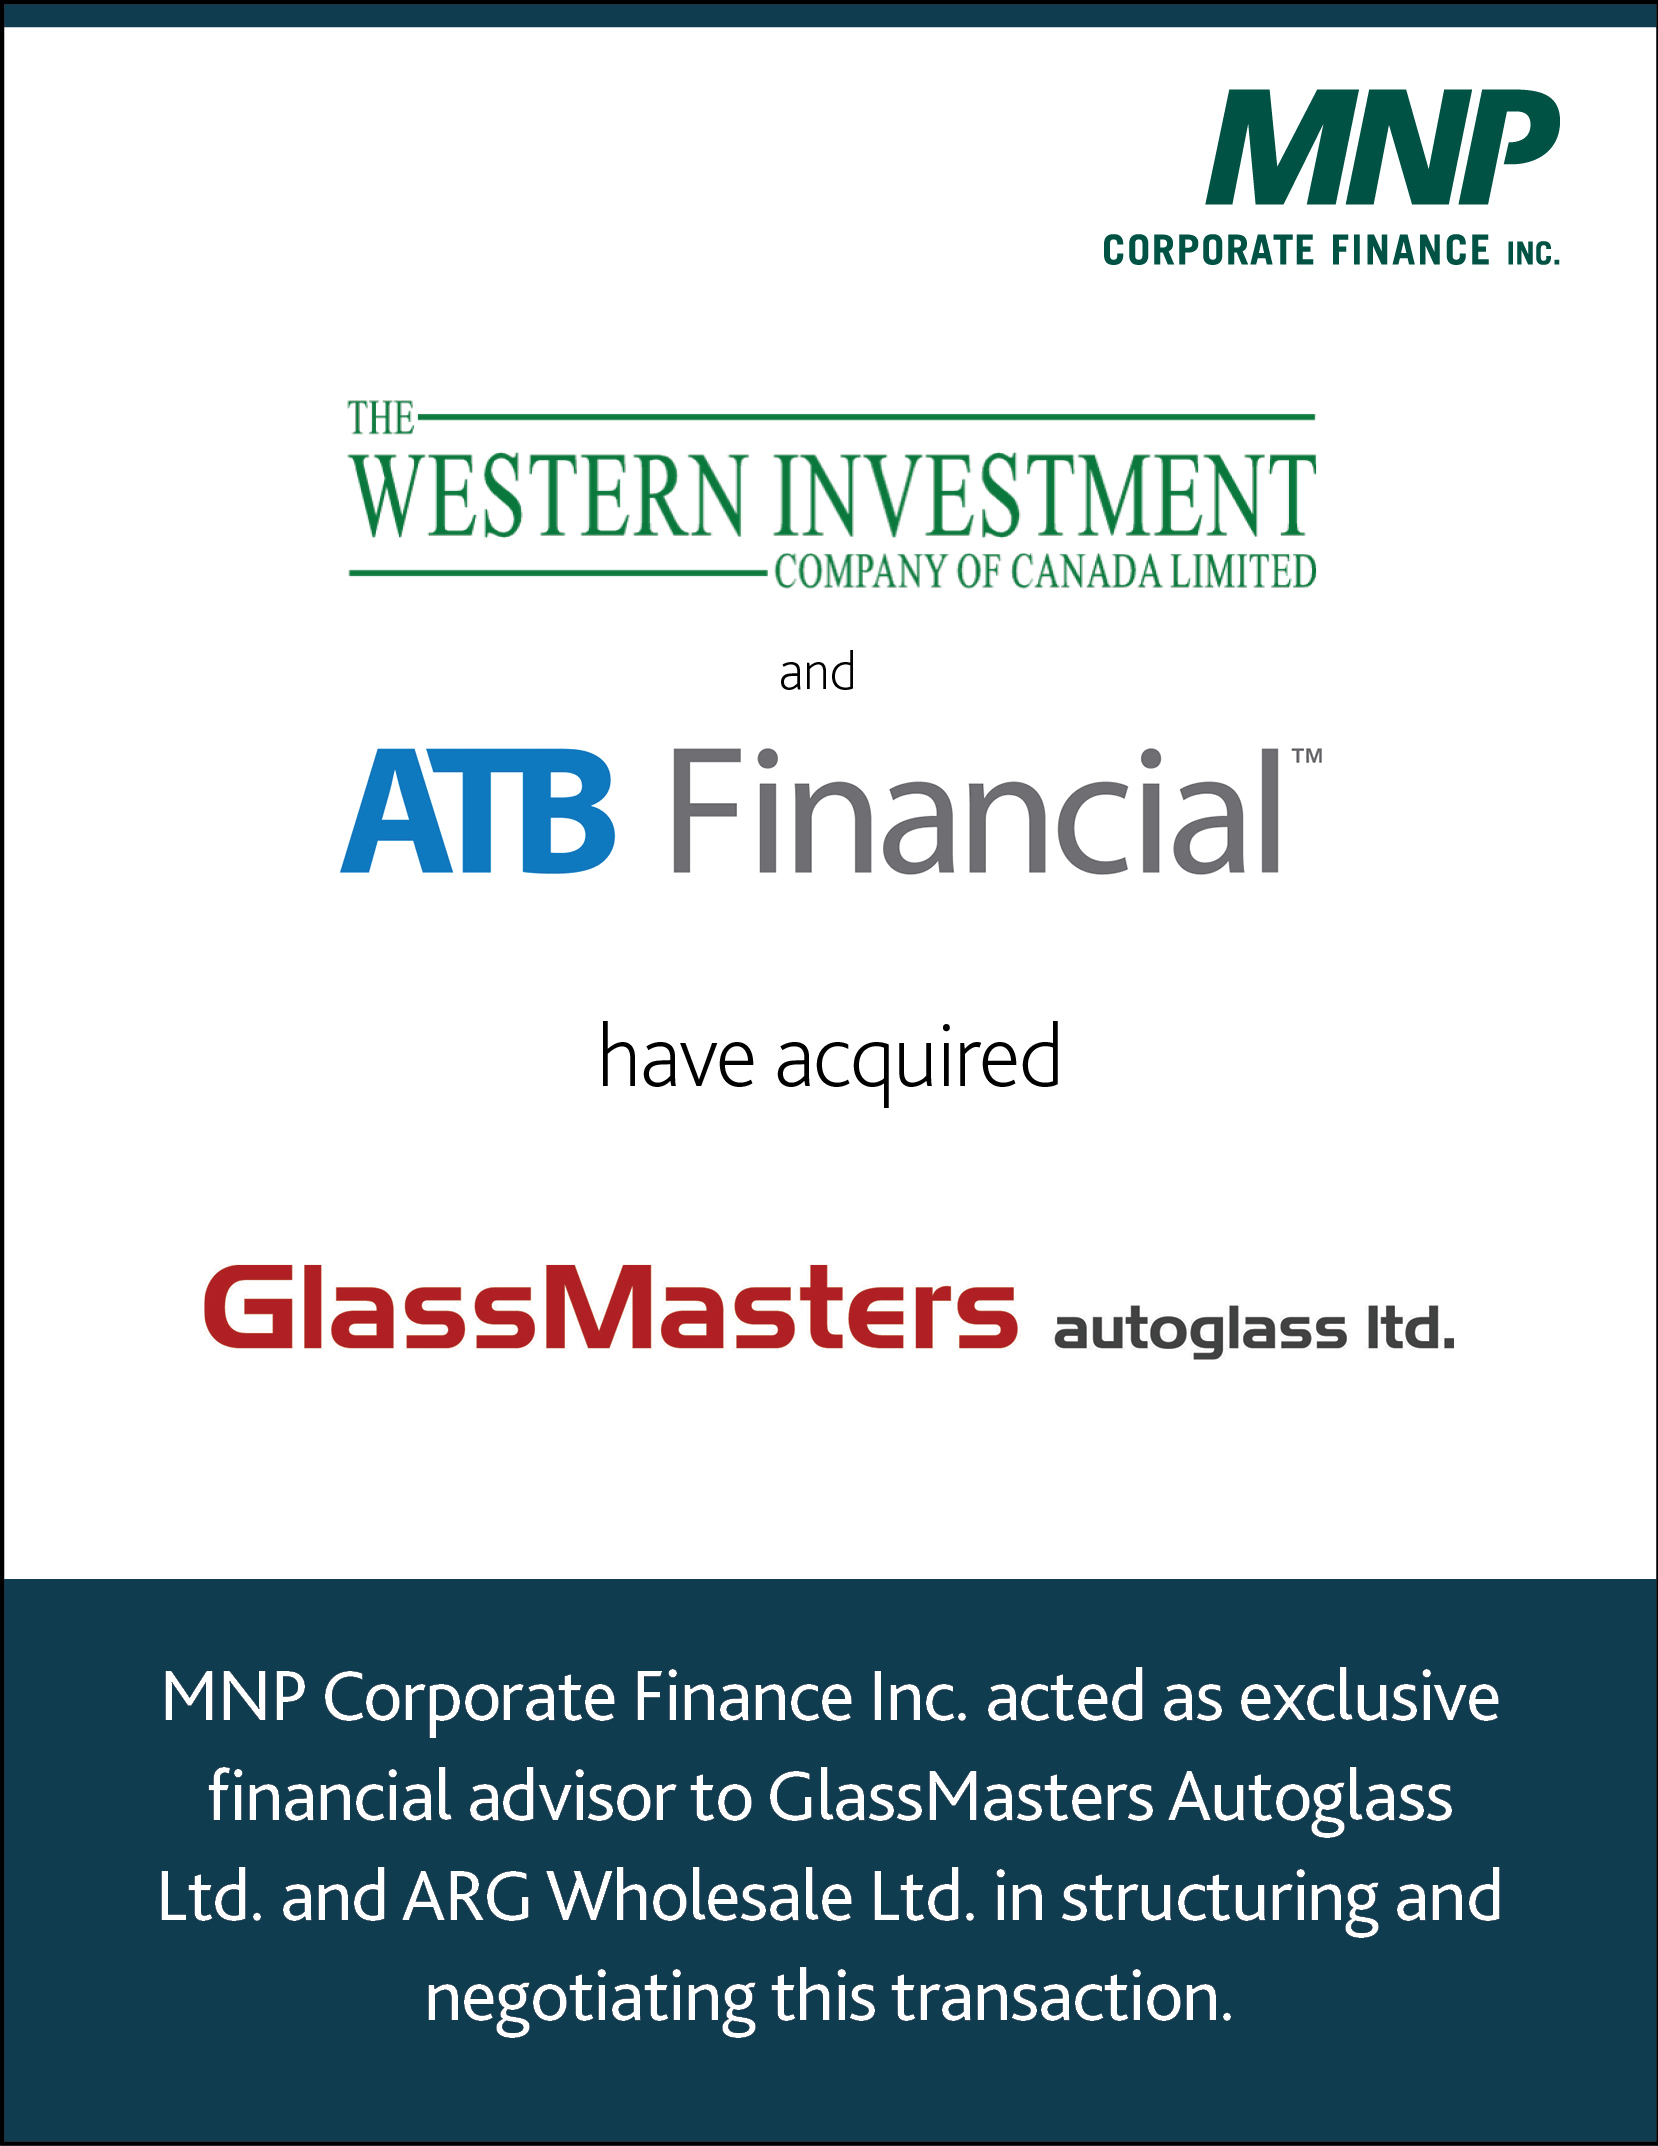 The Western Investment Company of Canada Limited and ATB Financial have acquired GlassMasters Autoglass ltd